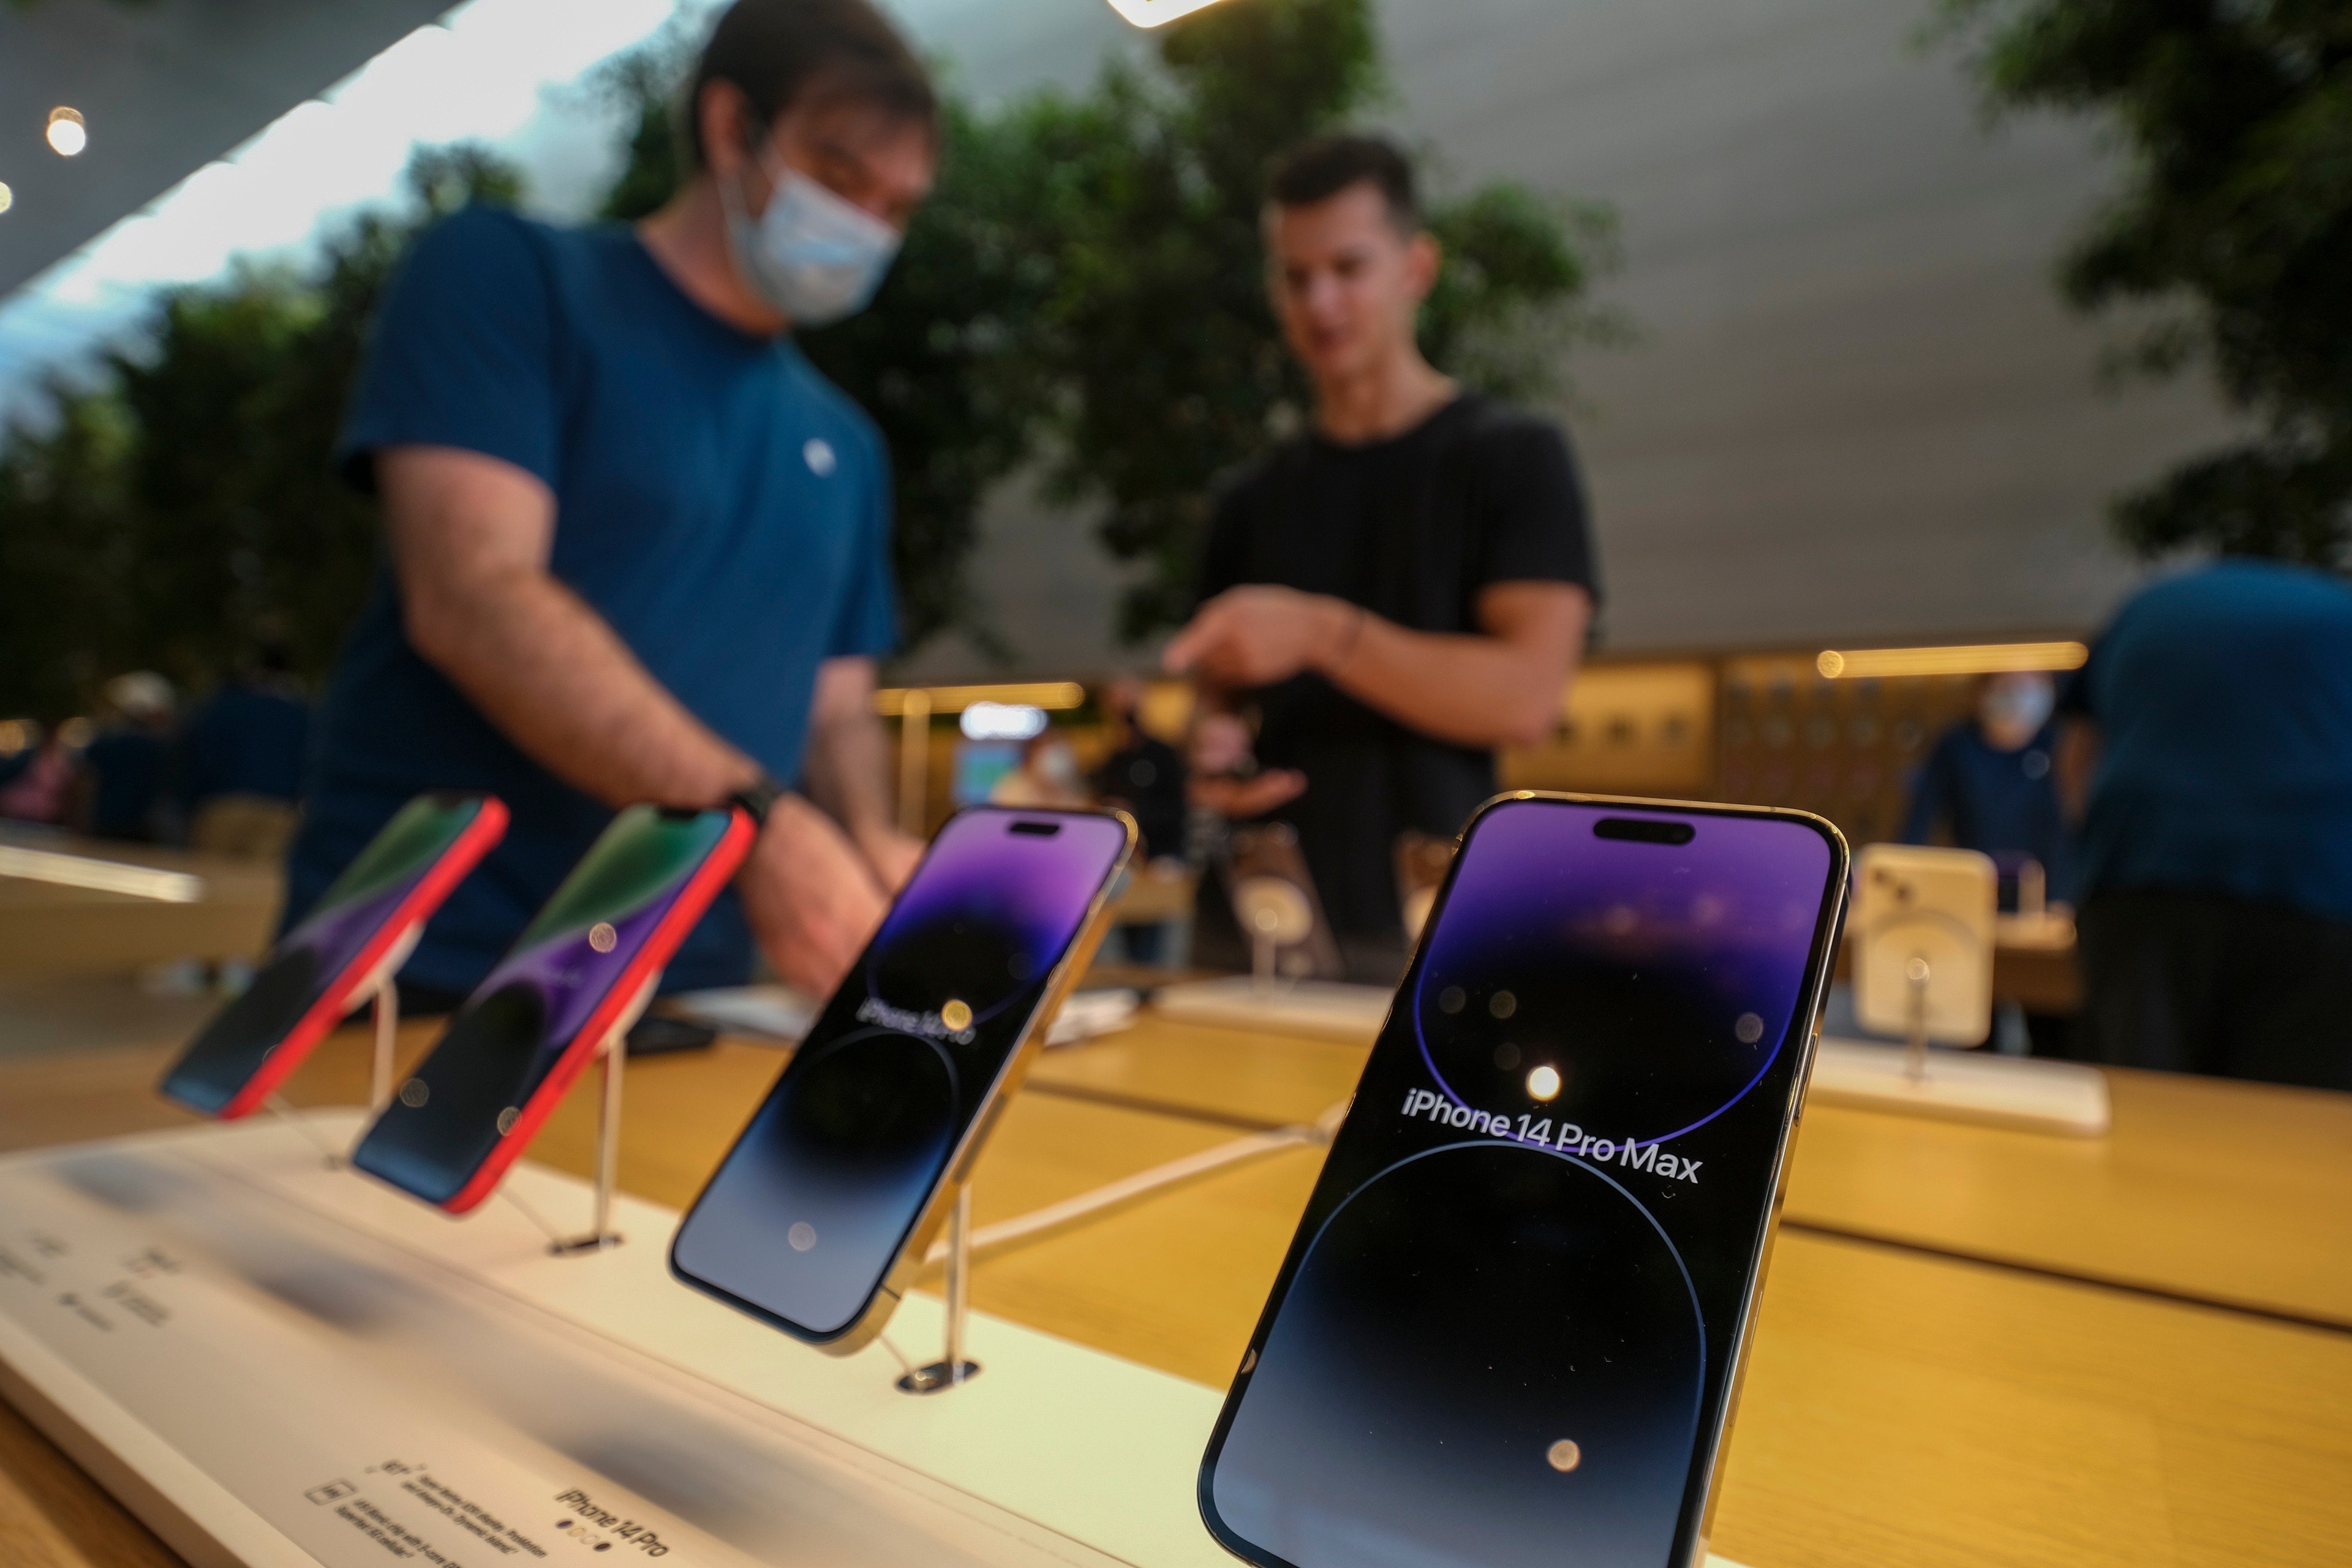 BOE plans to make organic light-emitting diodes (OLED) screens, used by Apple for its iPhones, at one of the sites. Photo: Shutterstock